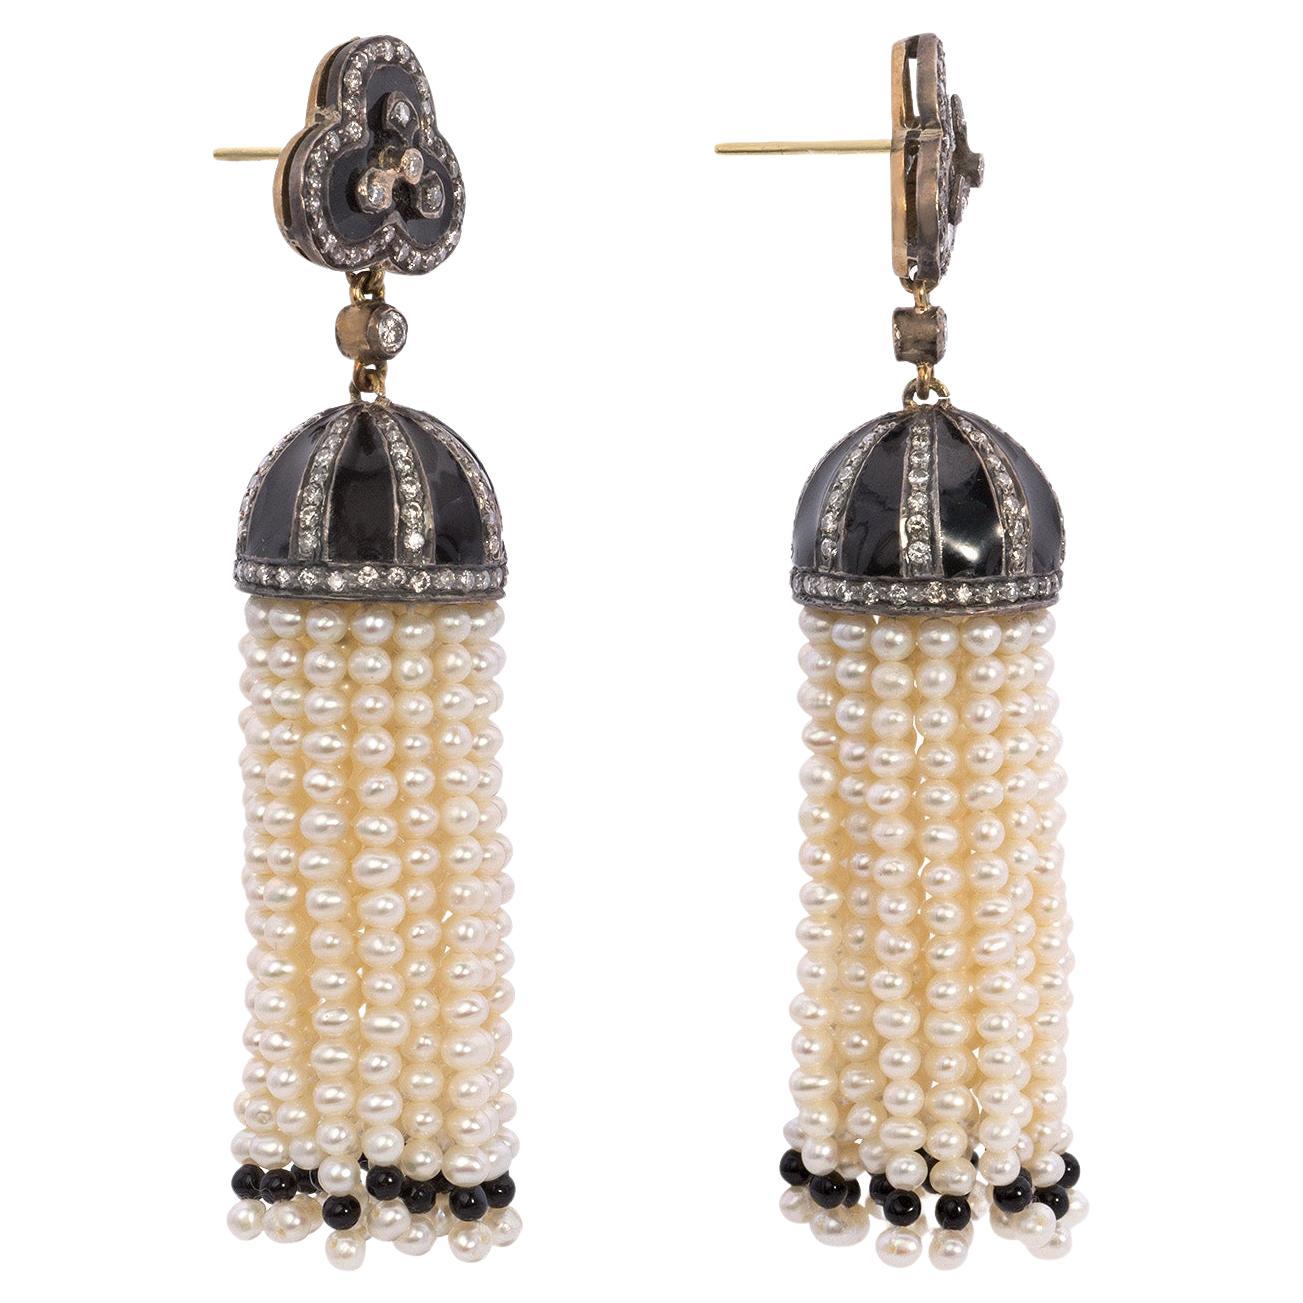 Introducing our stunning Antique Pearl and Diamond Earrings, the epitome of vintage charm and elegance. These one-of-a-kind earrings showcase a classic sautoir design synonymous with the Art Deco era, featuring exquisite rose-cut diamonds and